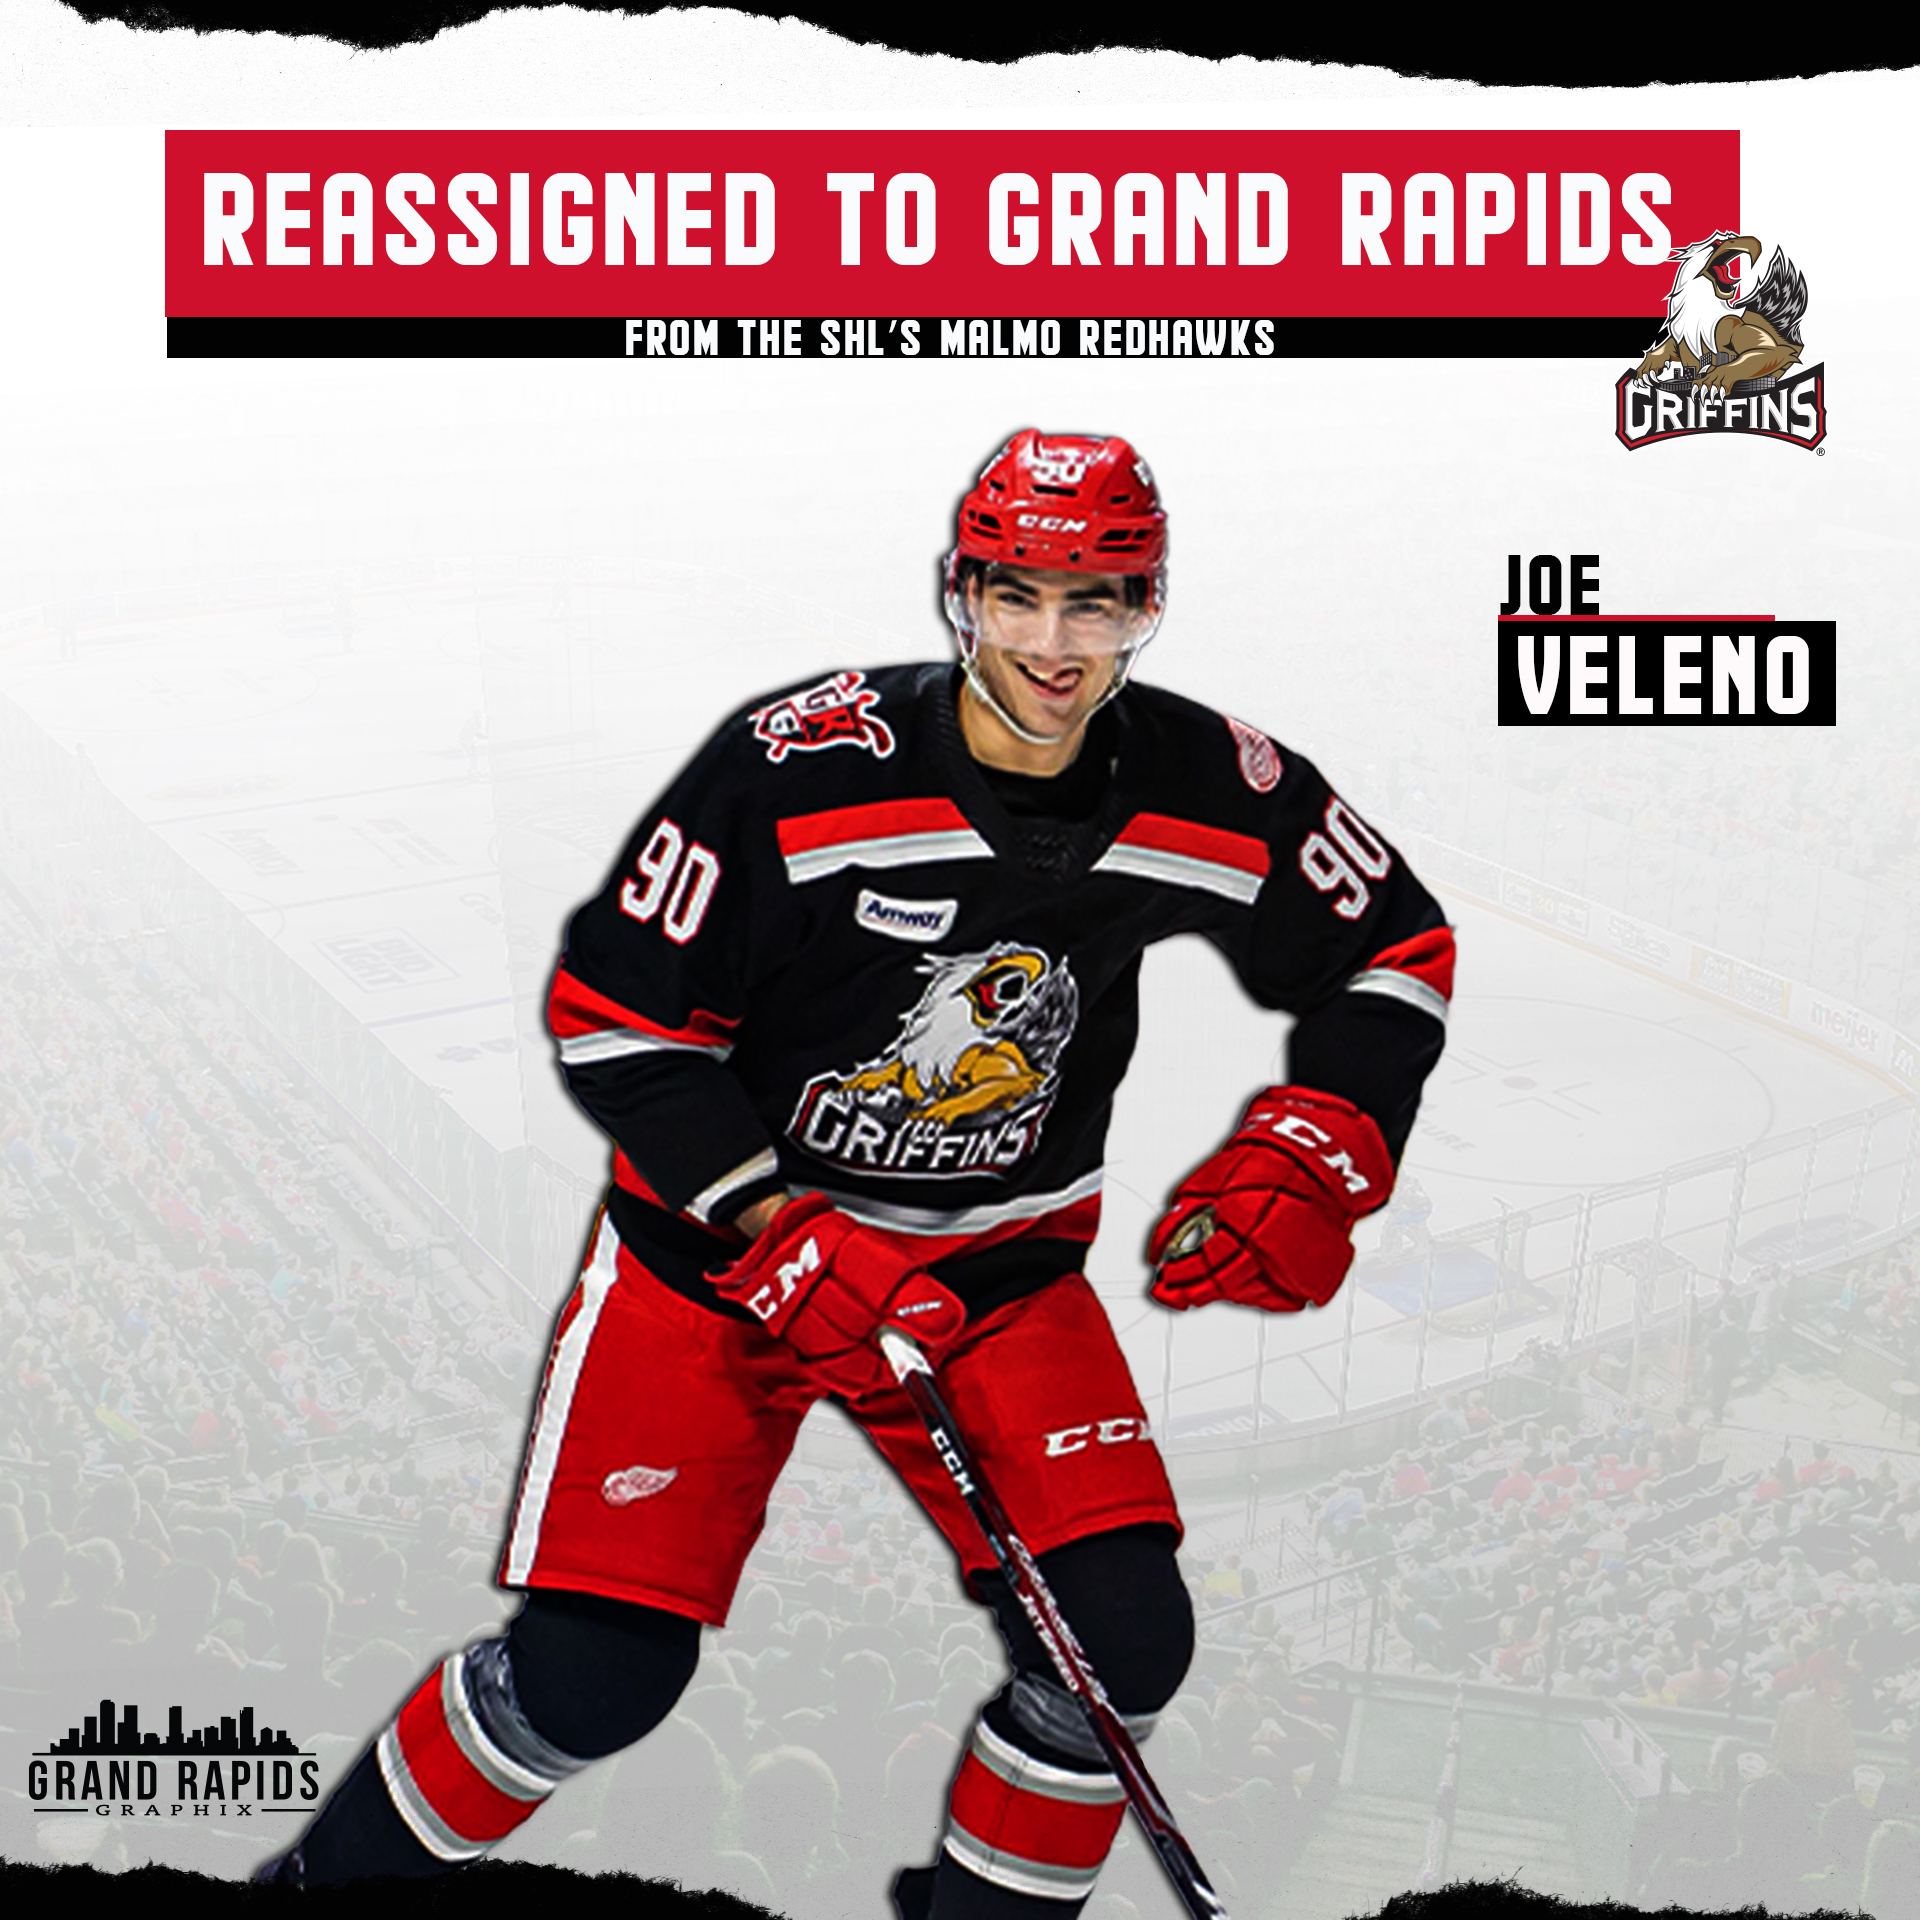 Rapids Griffins on Twitter: "The Detroit Red Wings on Saturday reassigned center Joe Veleno to the Griffins from the Malmo Redhawks. Details &gt;&gt; https://t.co/UPhJJ3PoCO" / Twitter